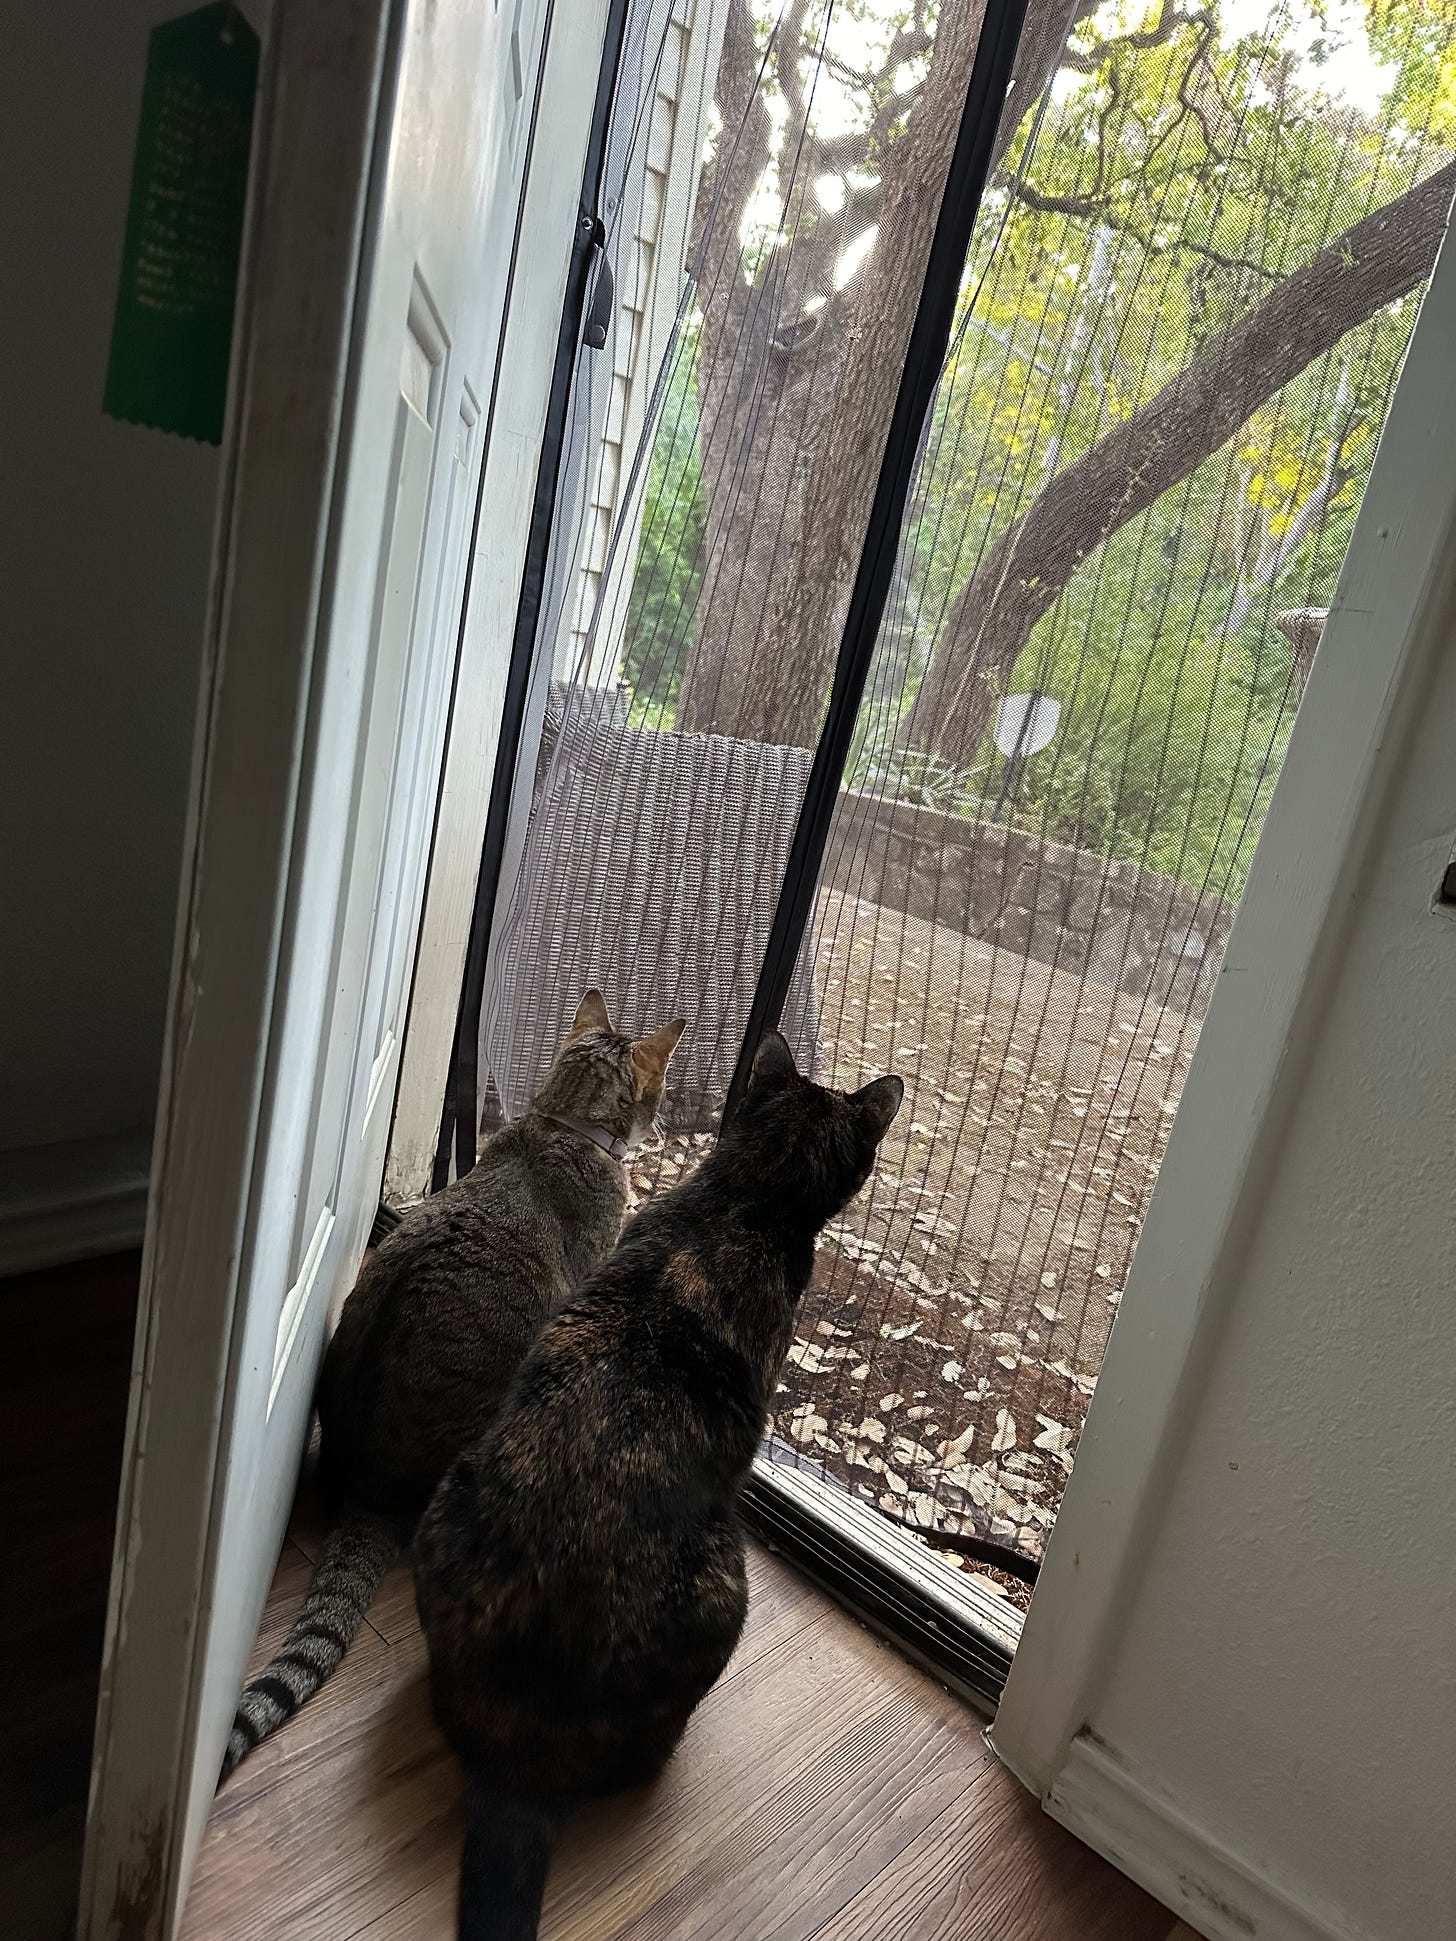 Two cats sit side by side and look out through a screen door.